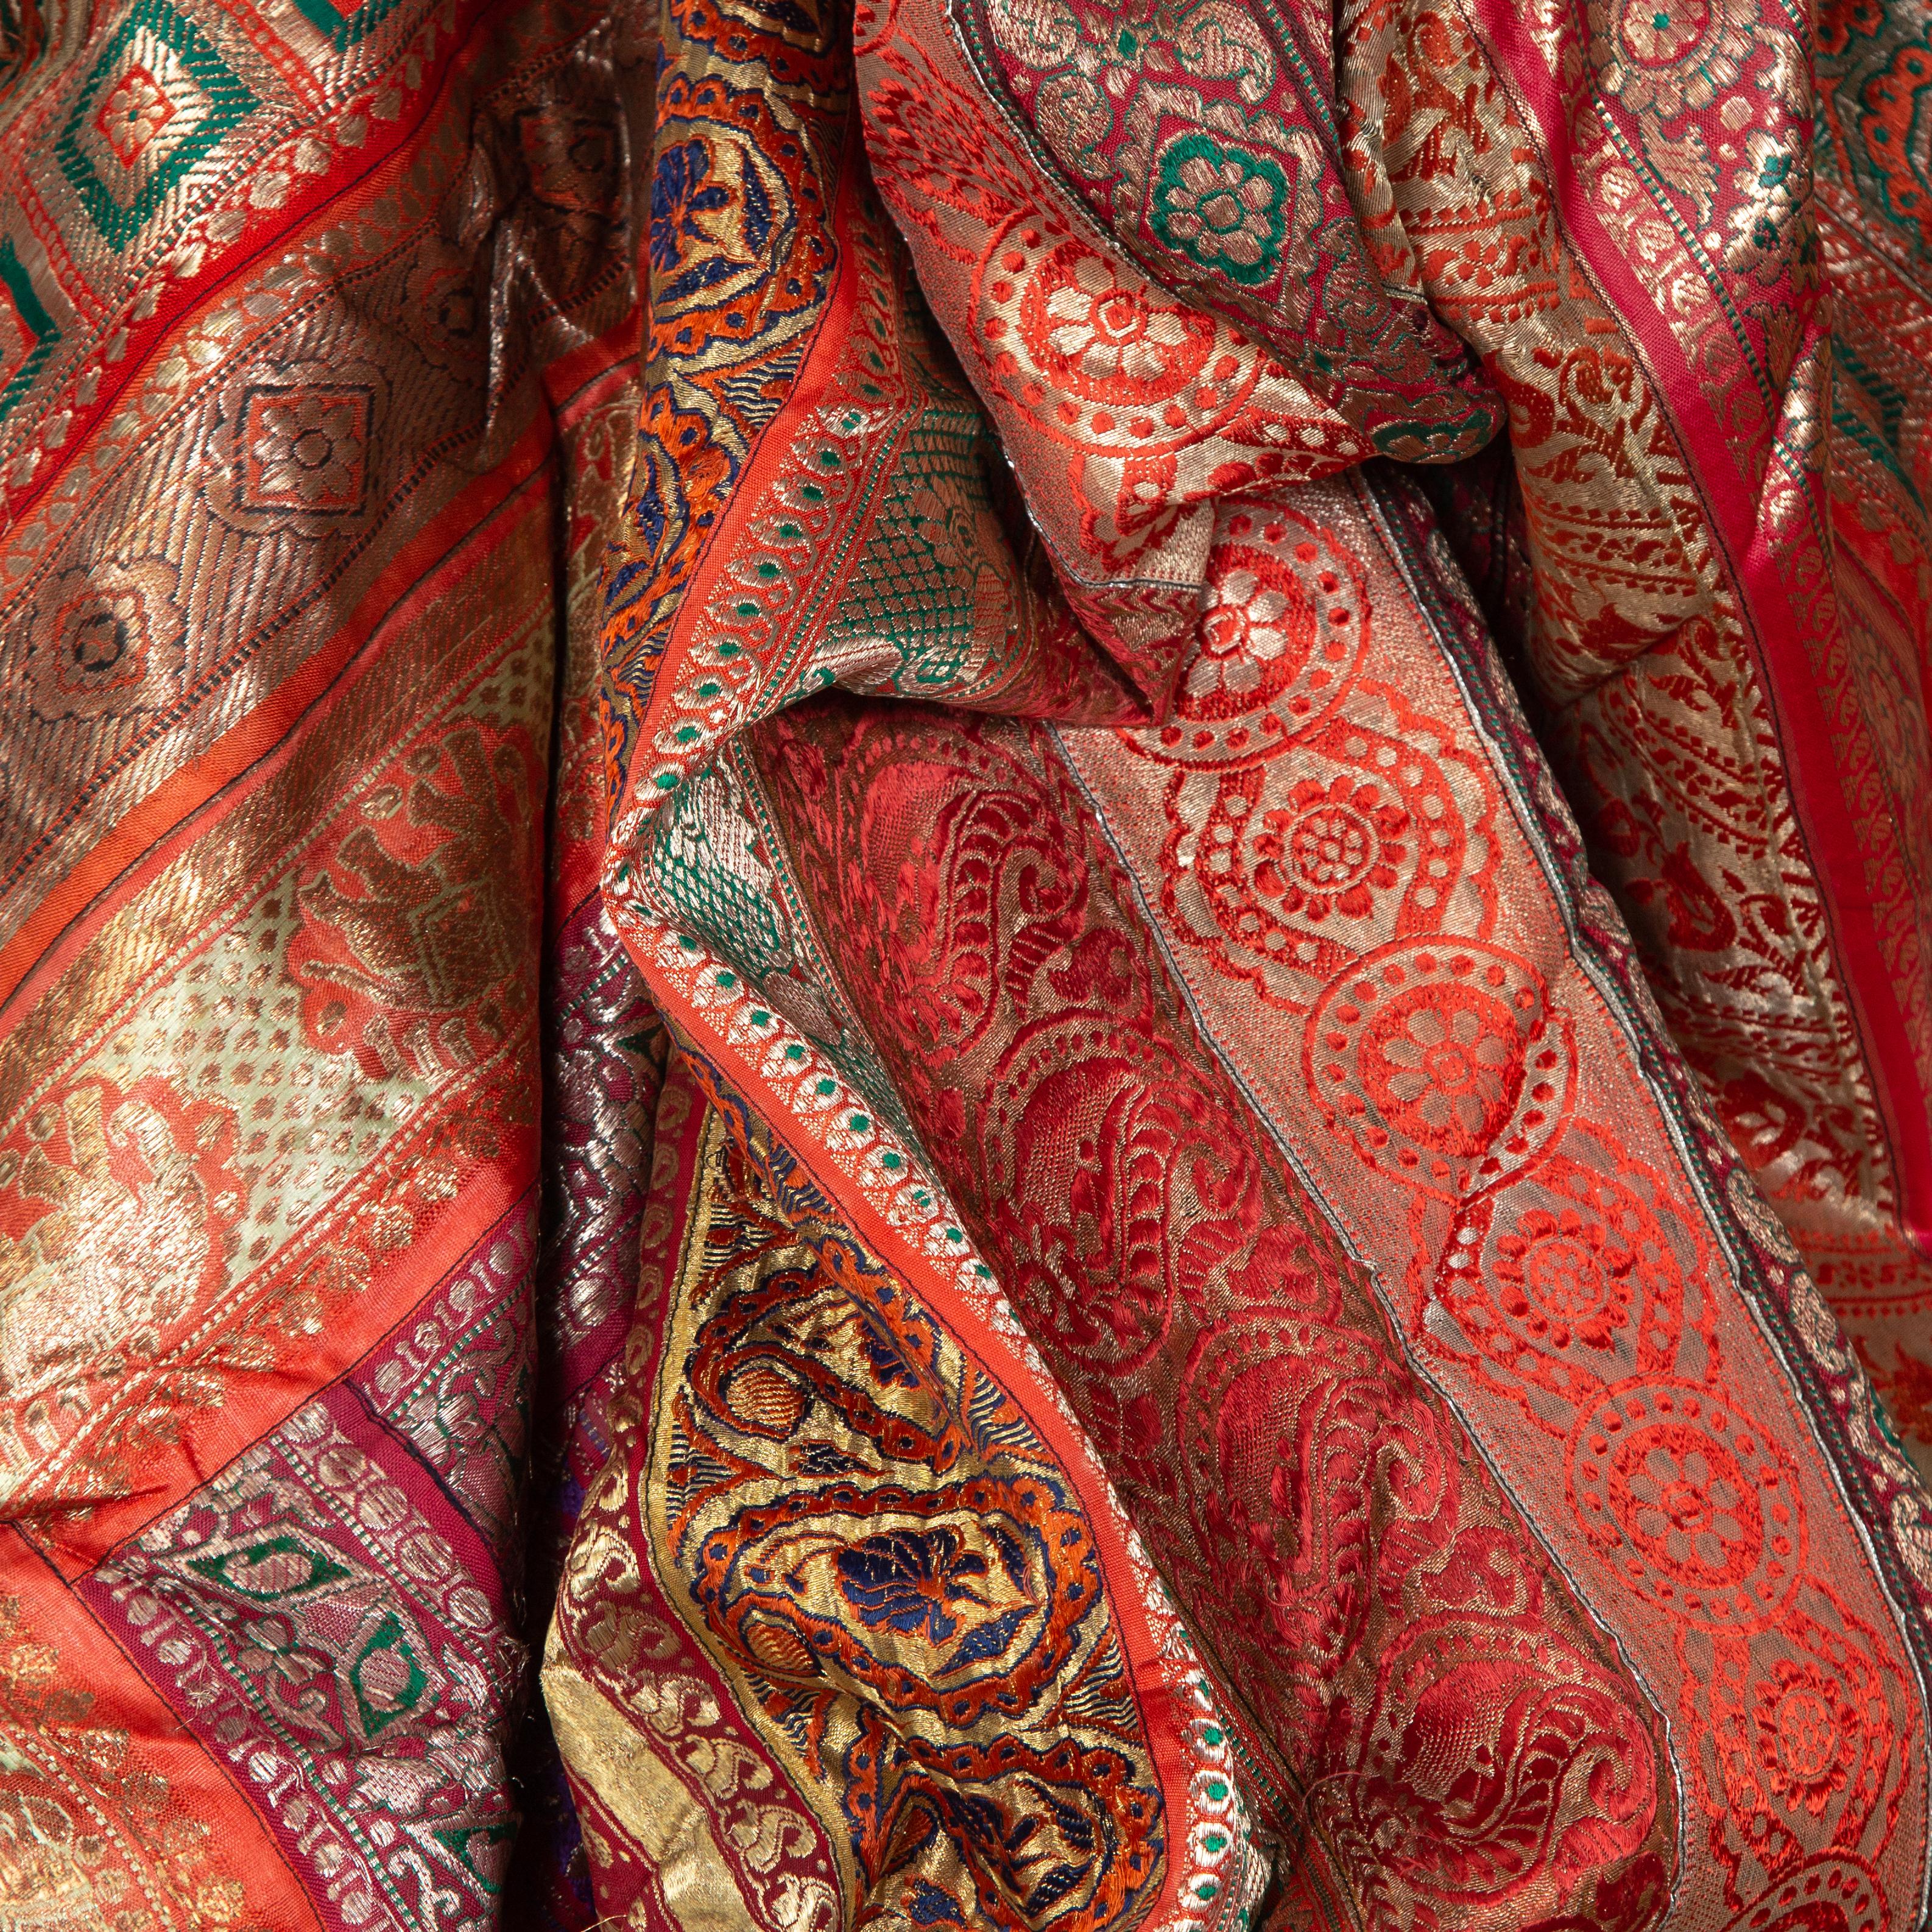 An Indian vintage large silk embroidered fabric from the second half of the 20th century with red, orange, purple, green and golden tones among others. Possibly originating from Rajasthan, this stunning silk fabric is made of sari pieces that were